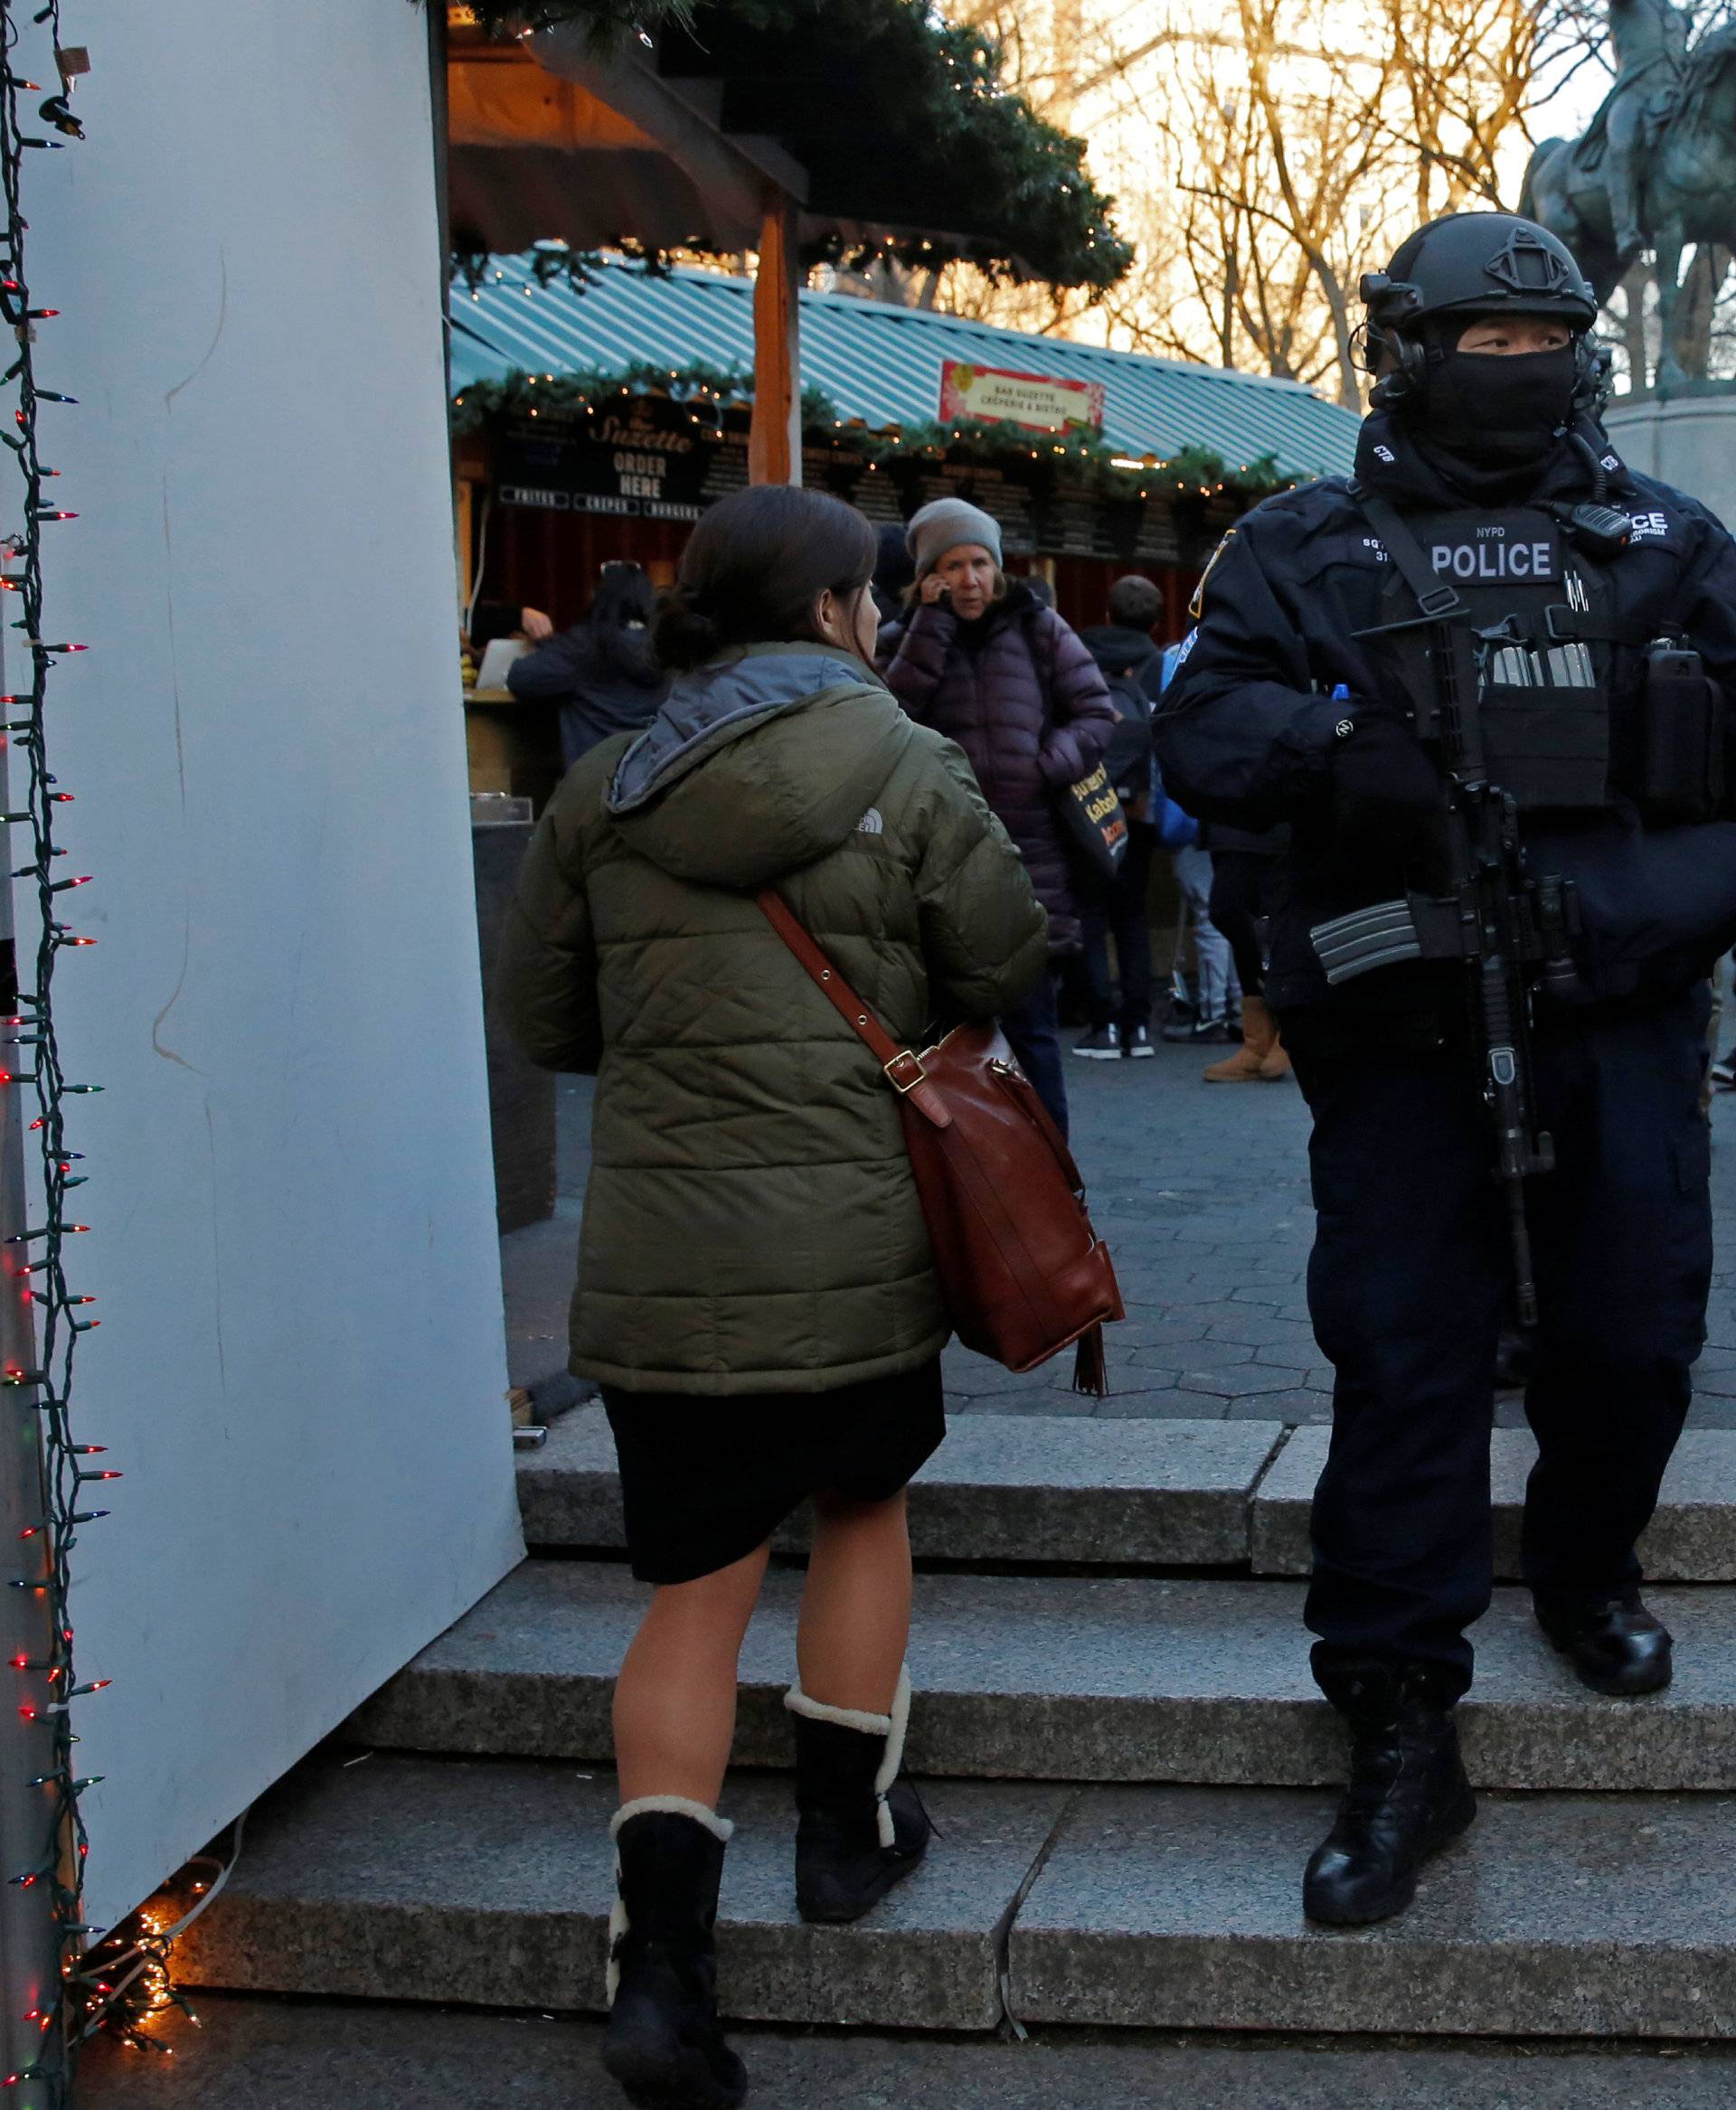 A member of the New York Police Department's Counterterrorism Bureau patrols the Union Square Holiday market following the Berlin Christmas market attacks in Manhattan, New York City, U.S.